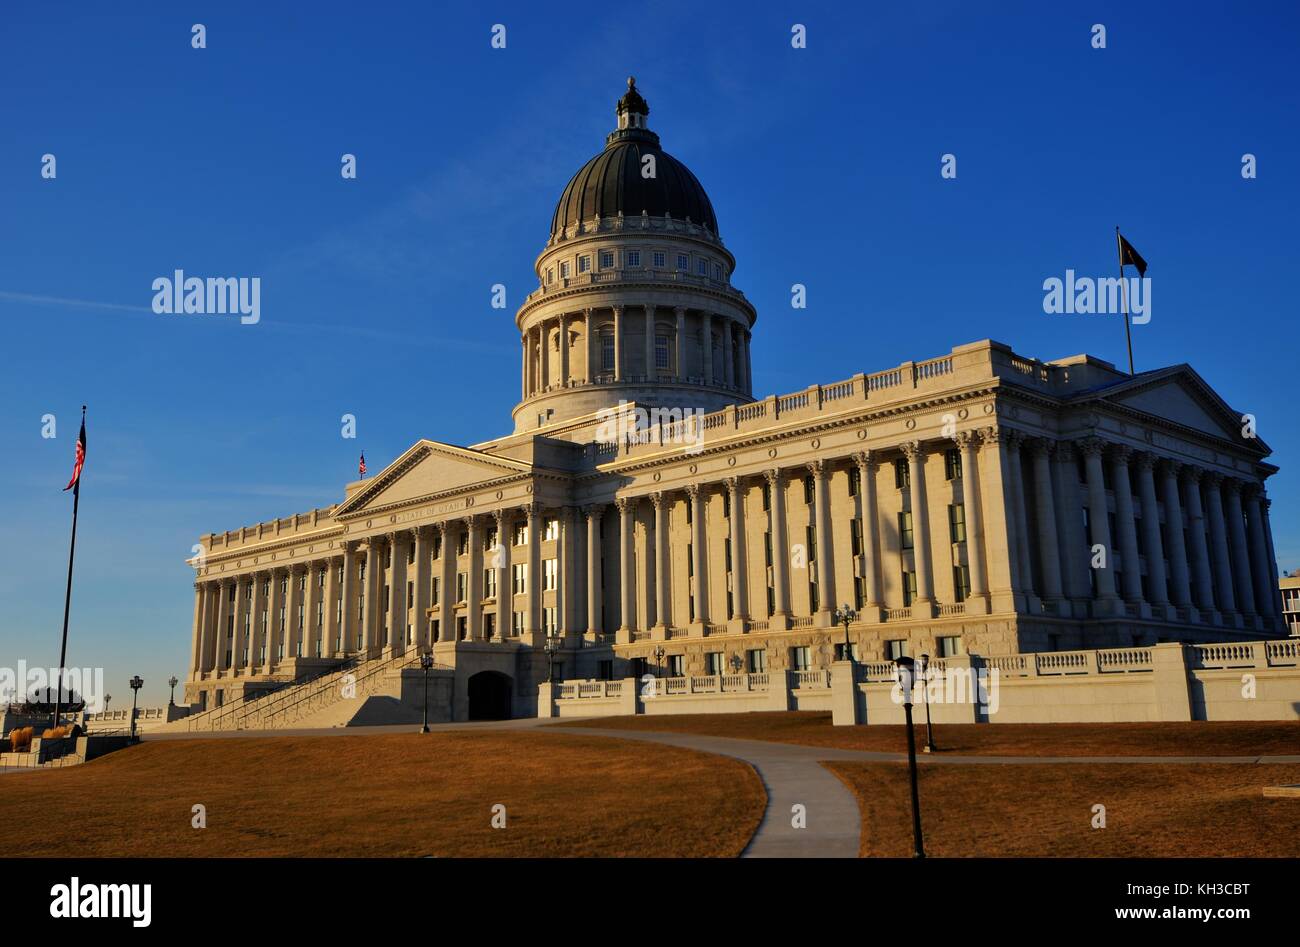 Utah State Capital Building on a beautiful winter's day at sunset. Stock Photo